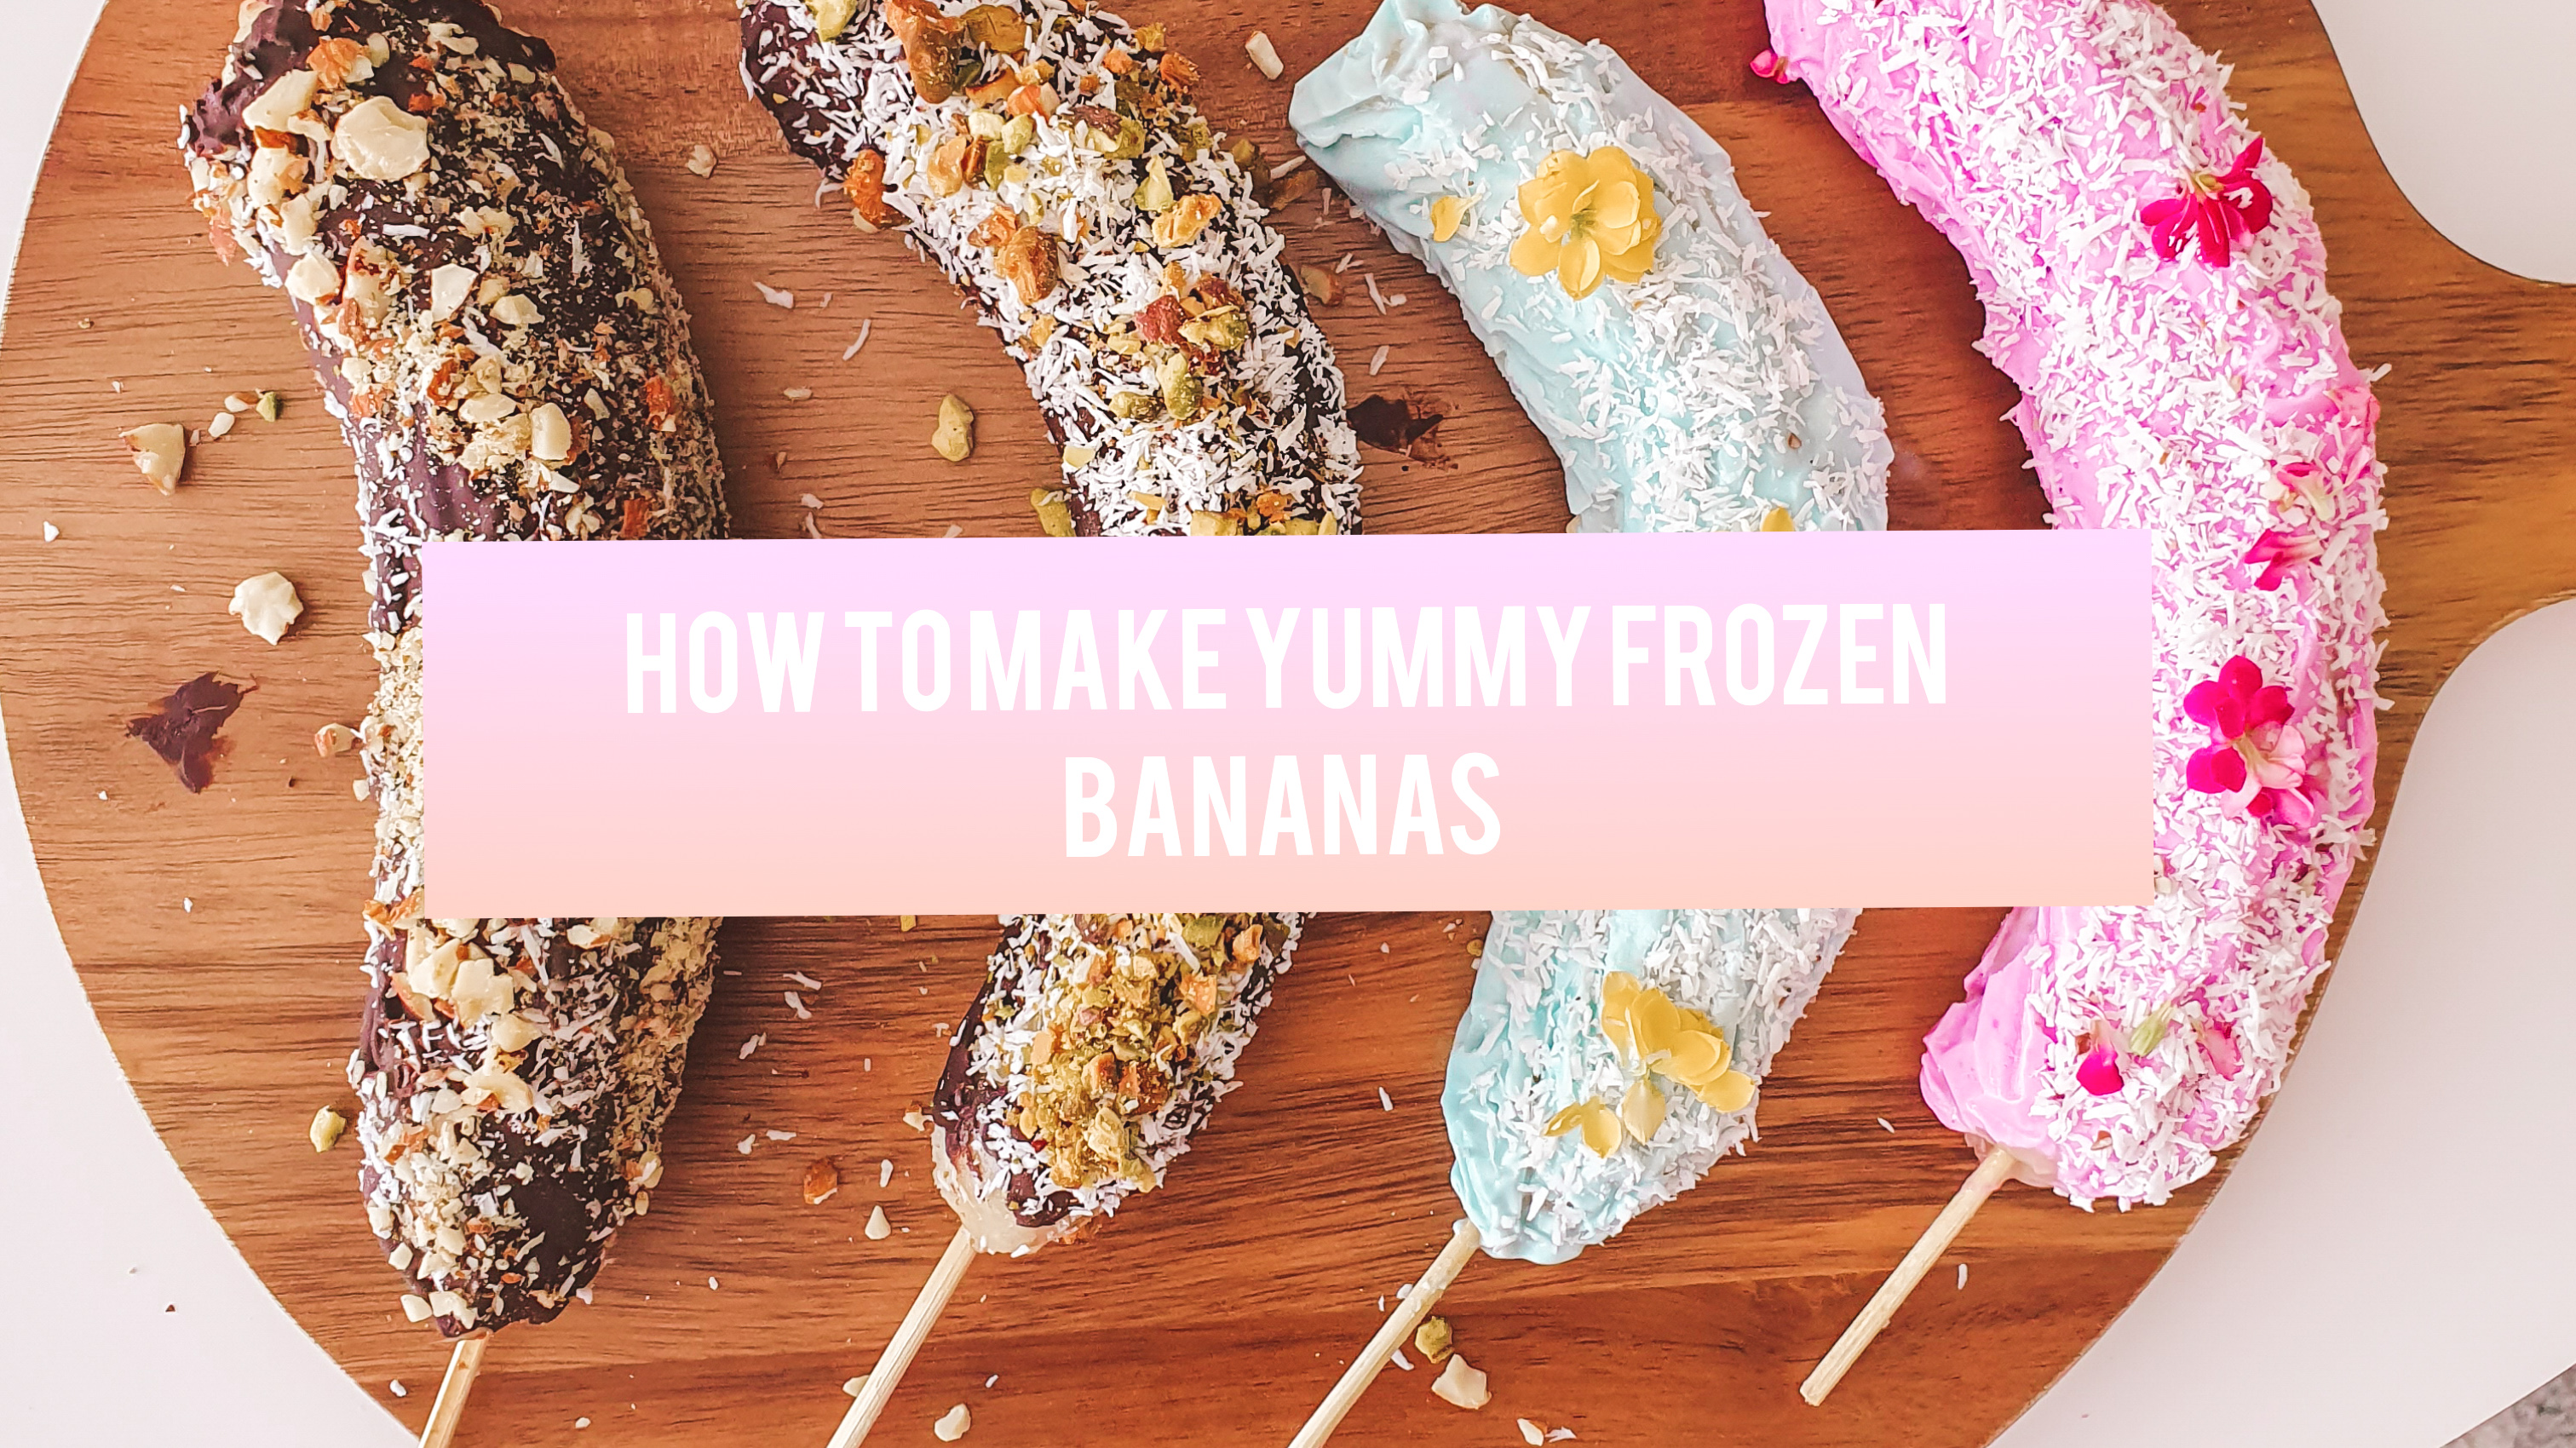 How To Make Yummy Instagrammable Frozen Banana Dessert The Mommy Couture - bunny ears 2017 roblox robaxacet review